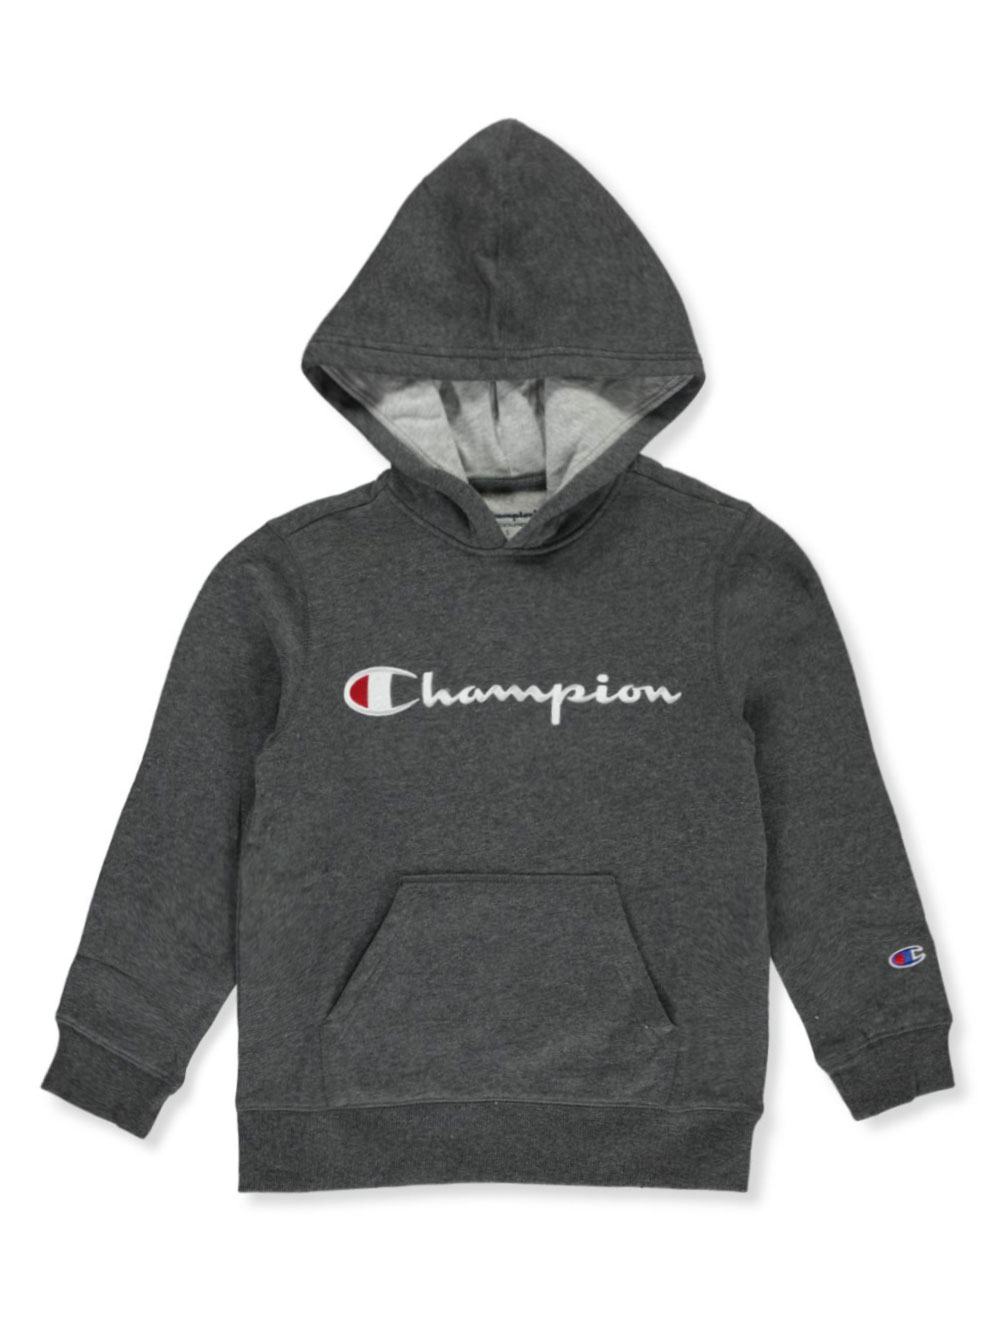 black and gold champion hoodie